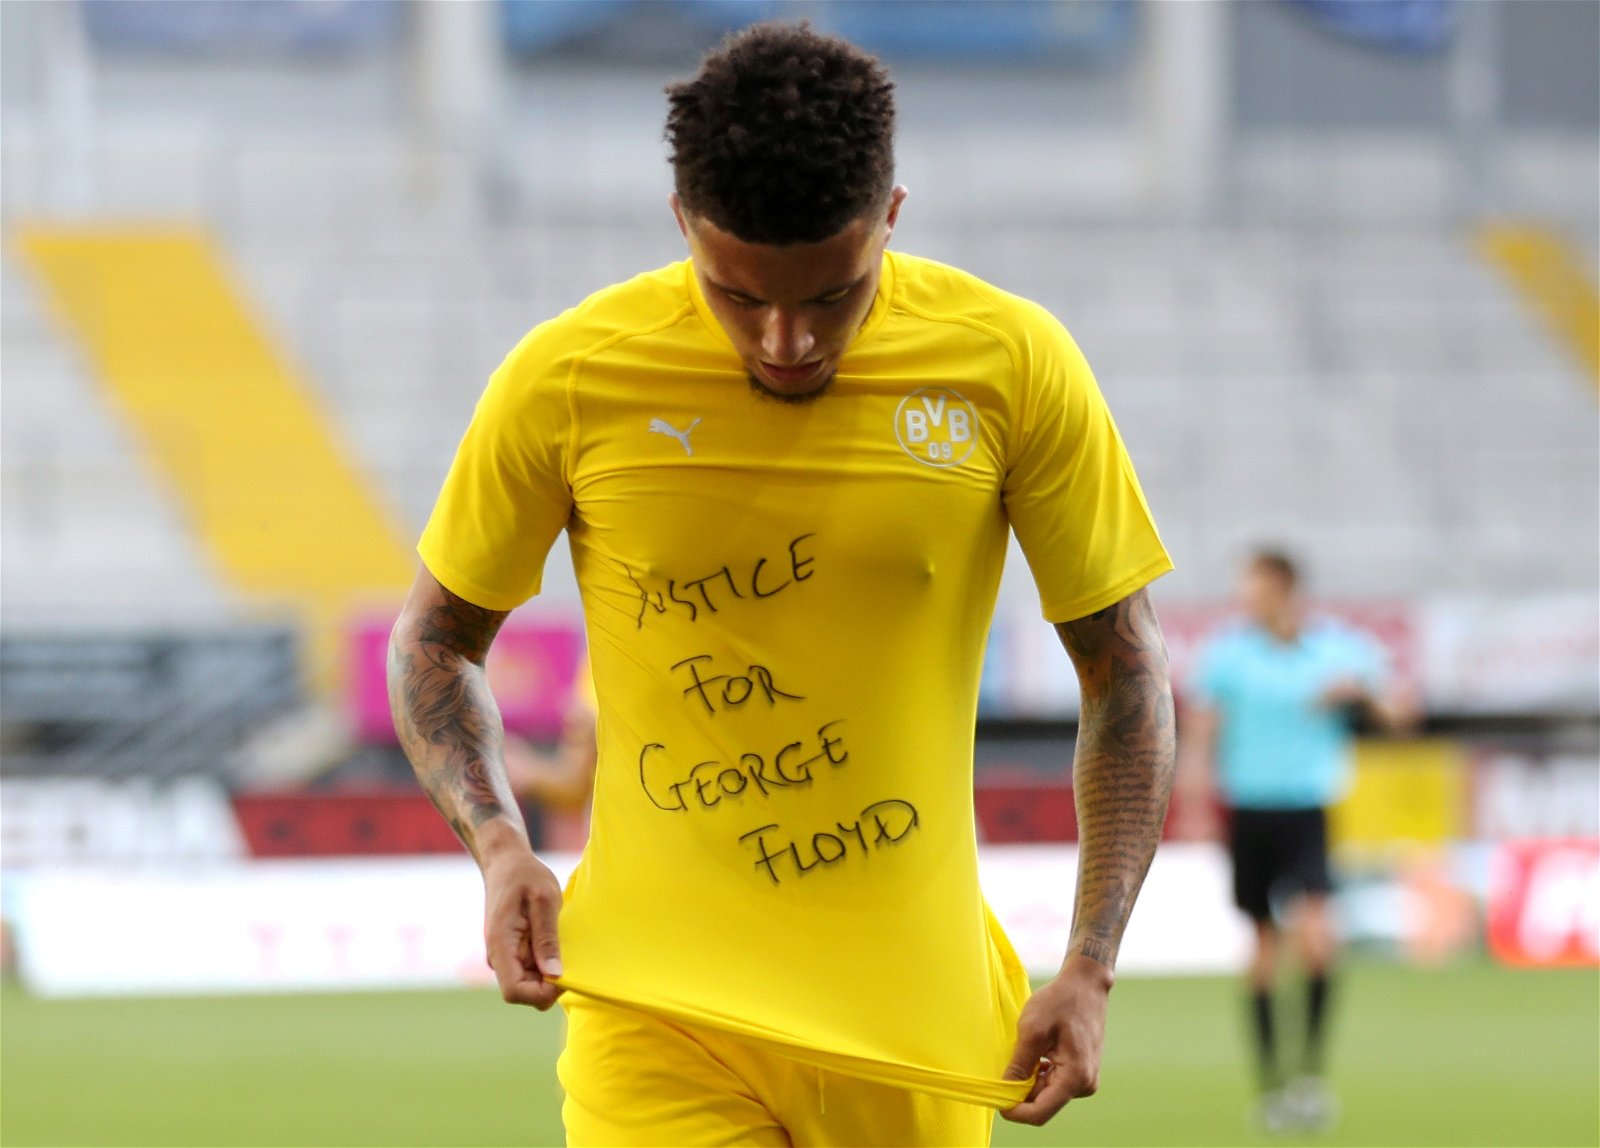 Football Players From Around Europe Show Their Support For George Floyd